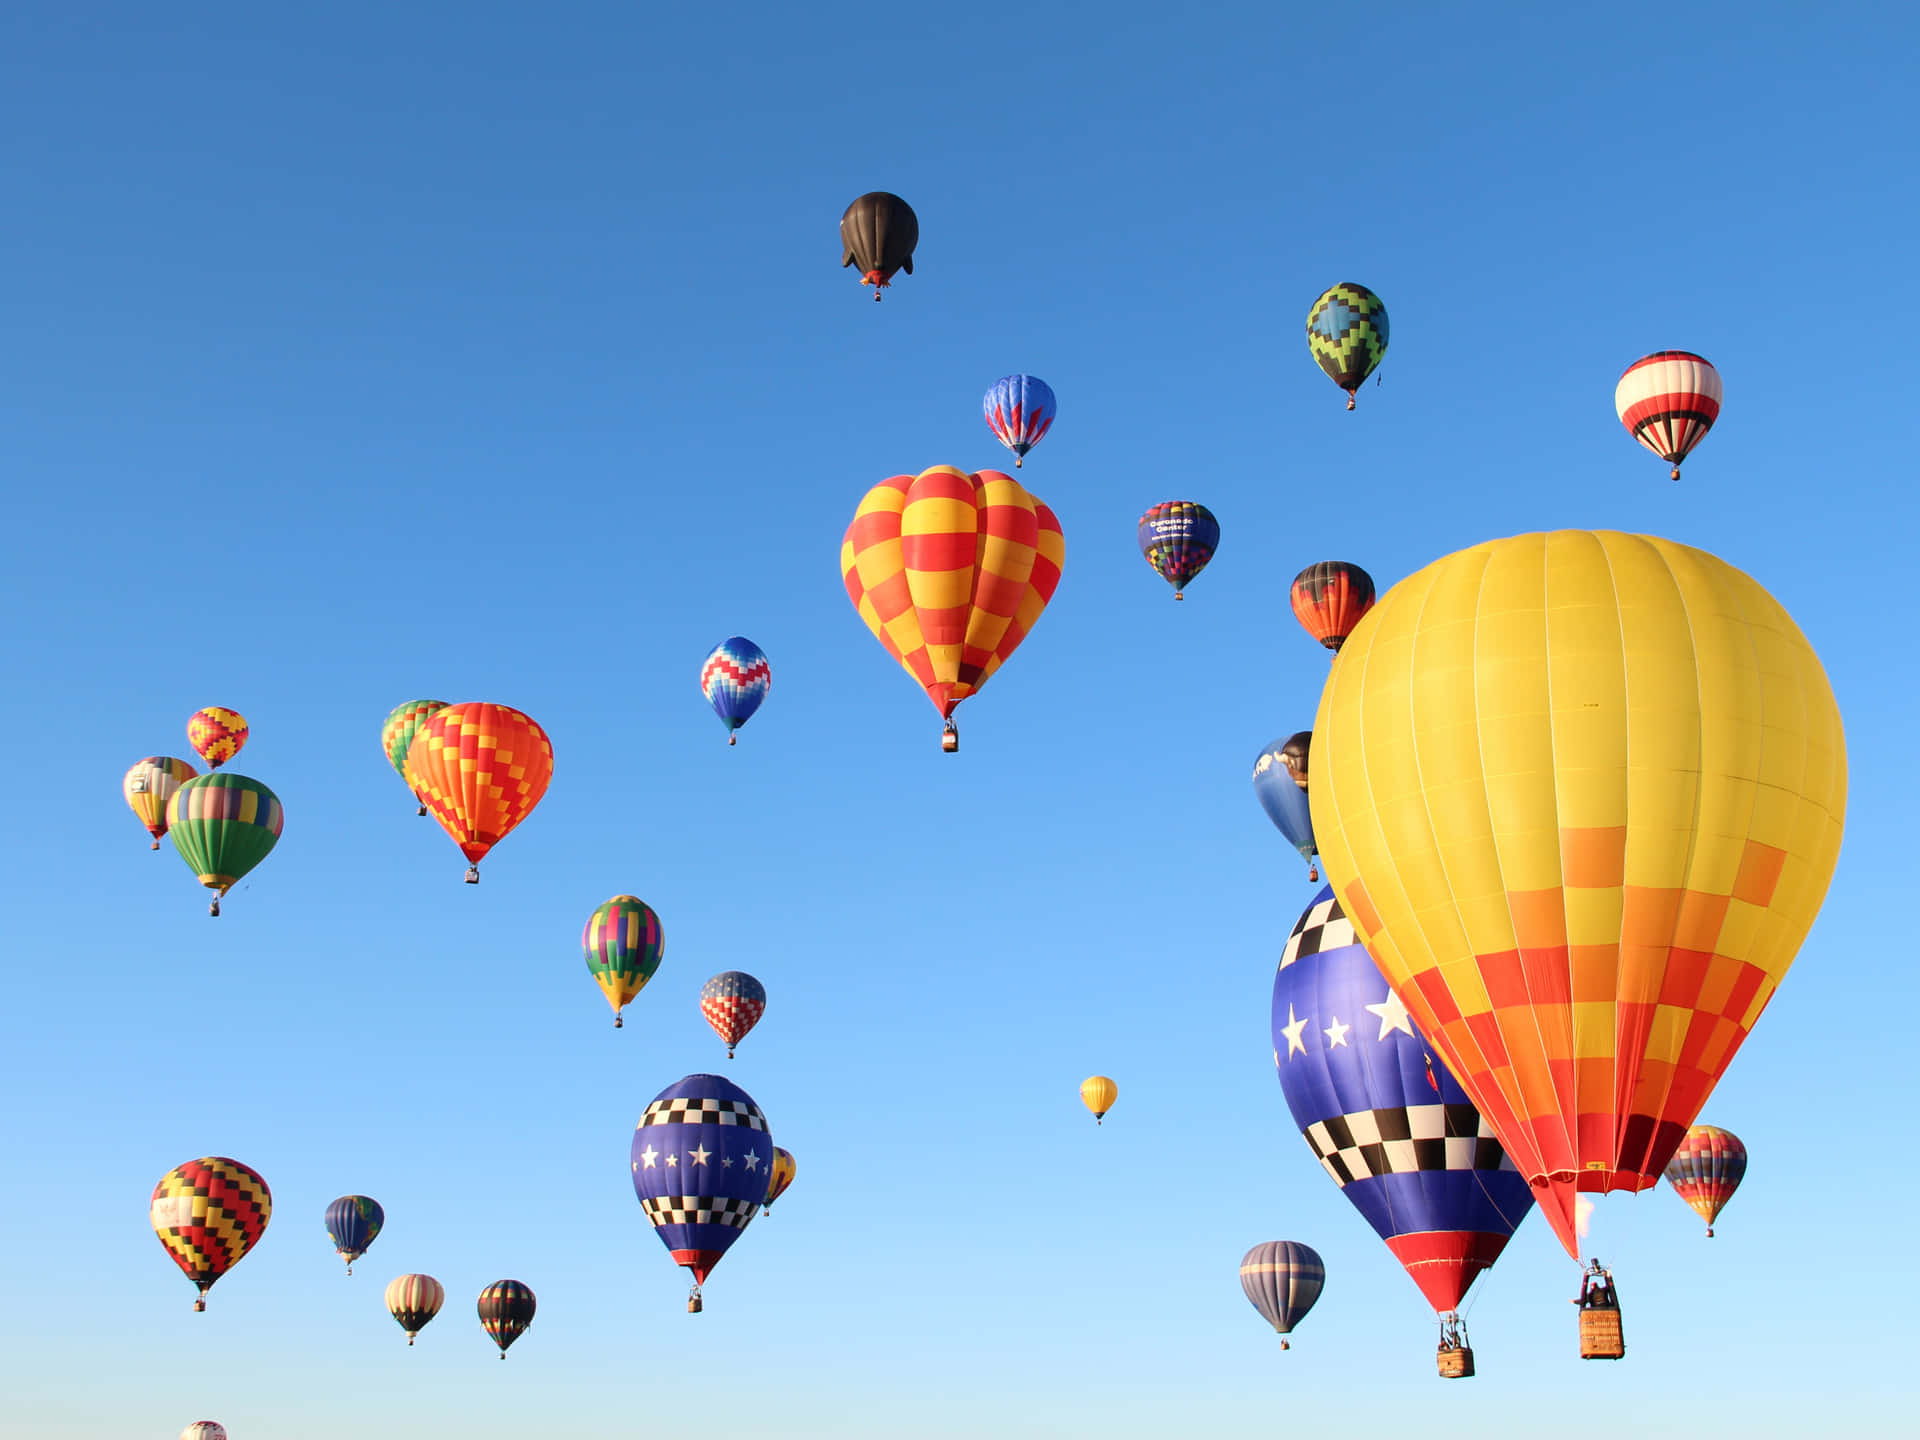 A Group Of Hot Air Balloons Flying In The Sky